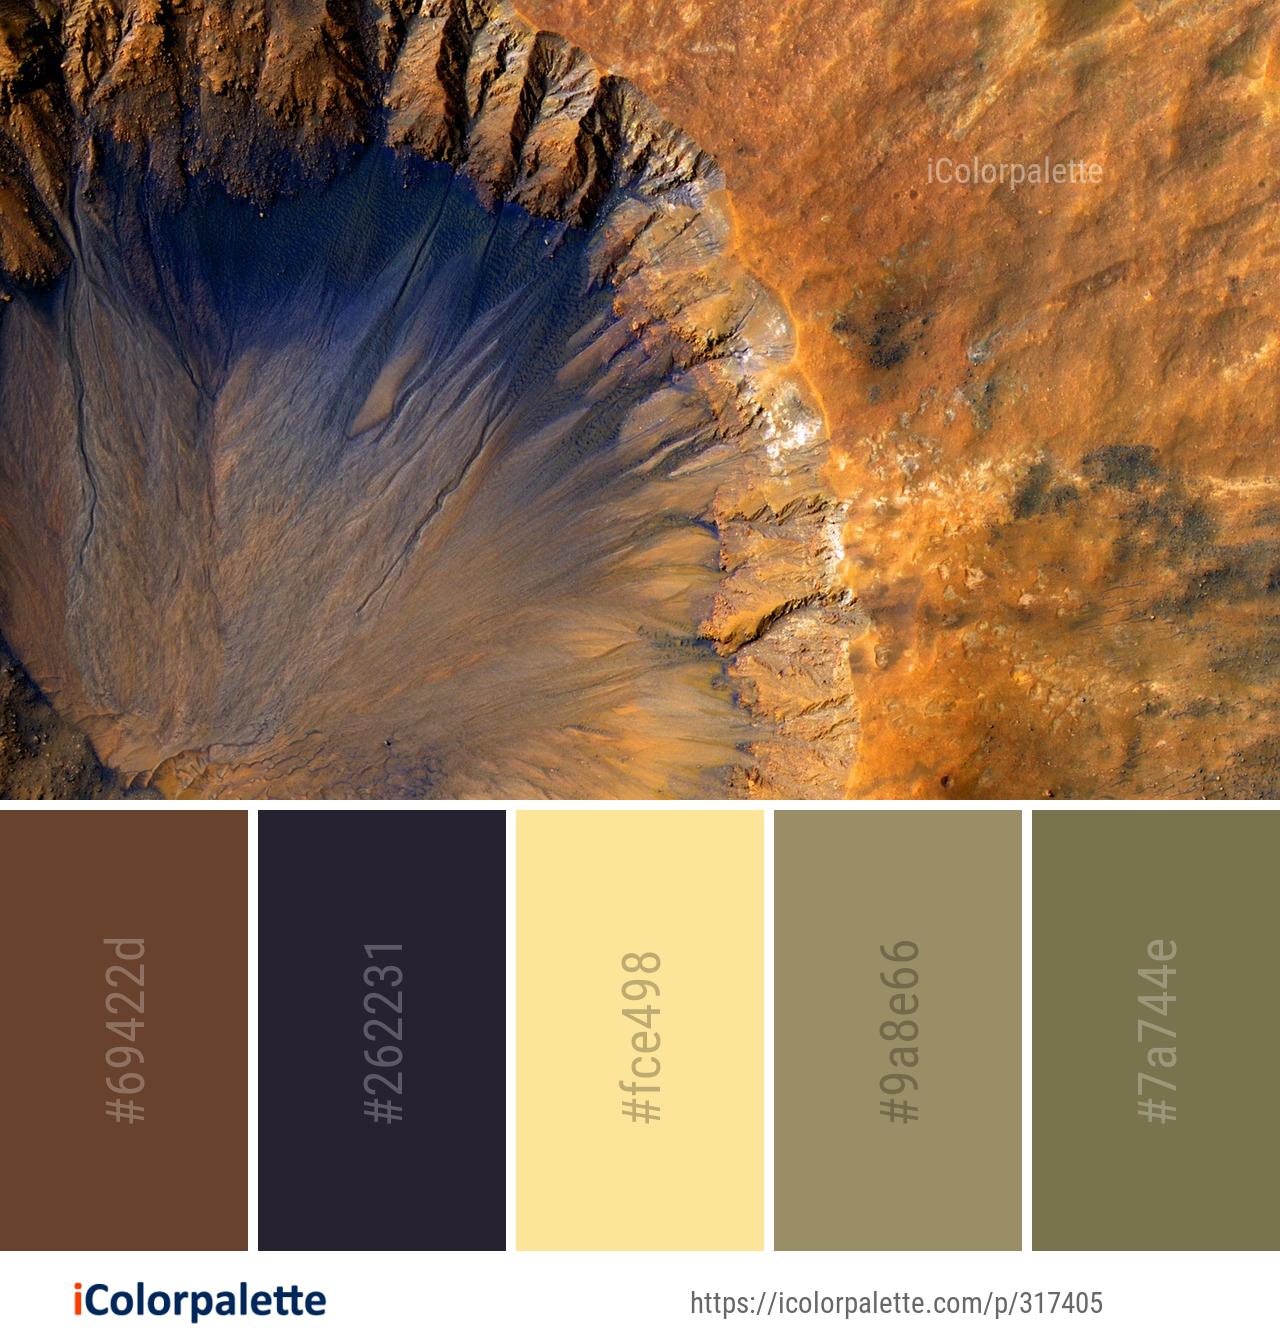 Color Palette Ideas from Formation Rock Geology Image